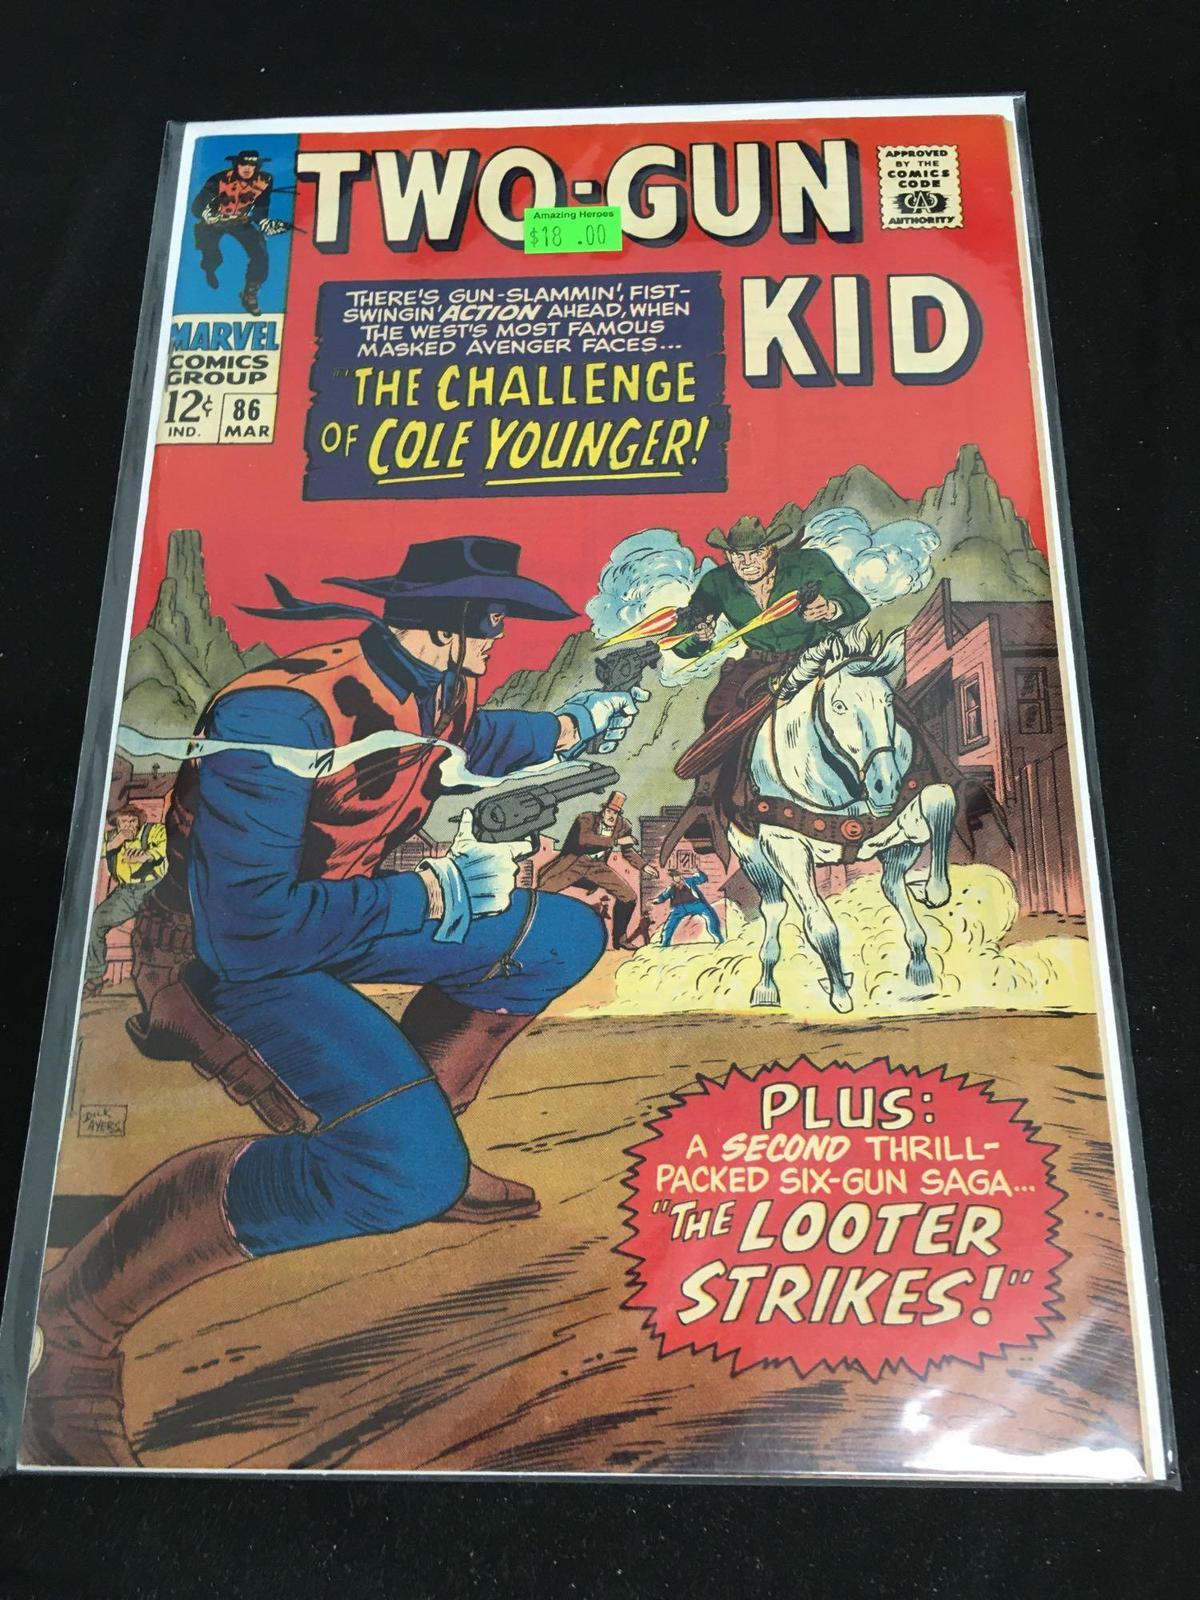 Two-Gun Kid #86 Comic Book from Amazing Collection